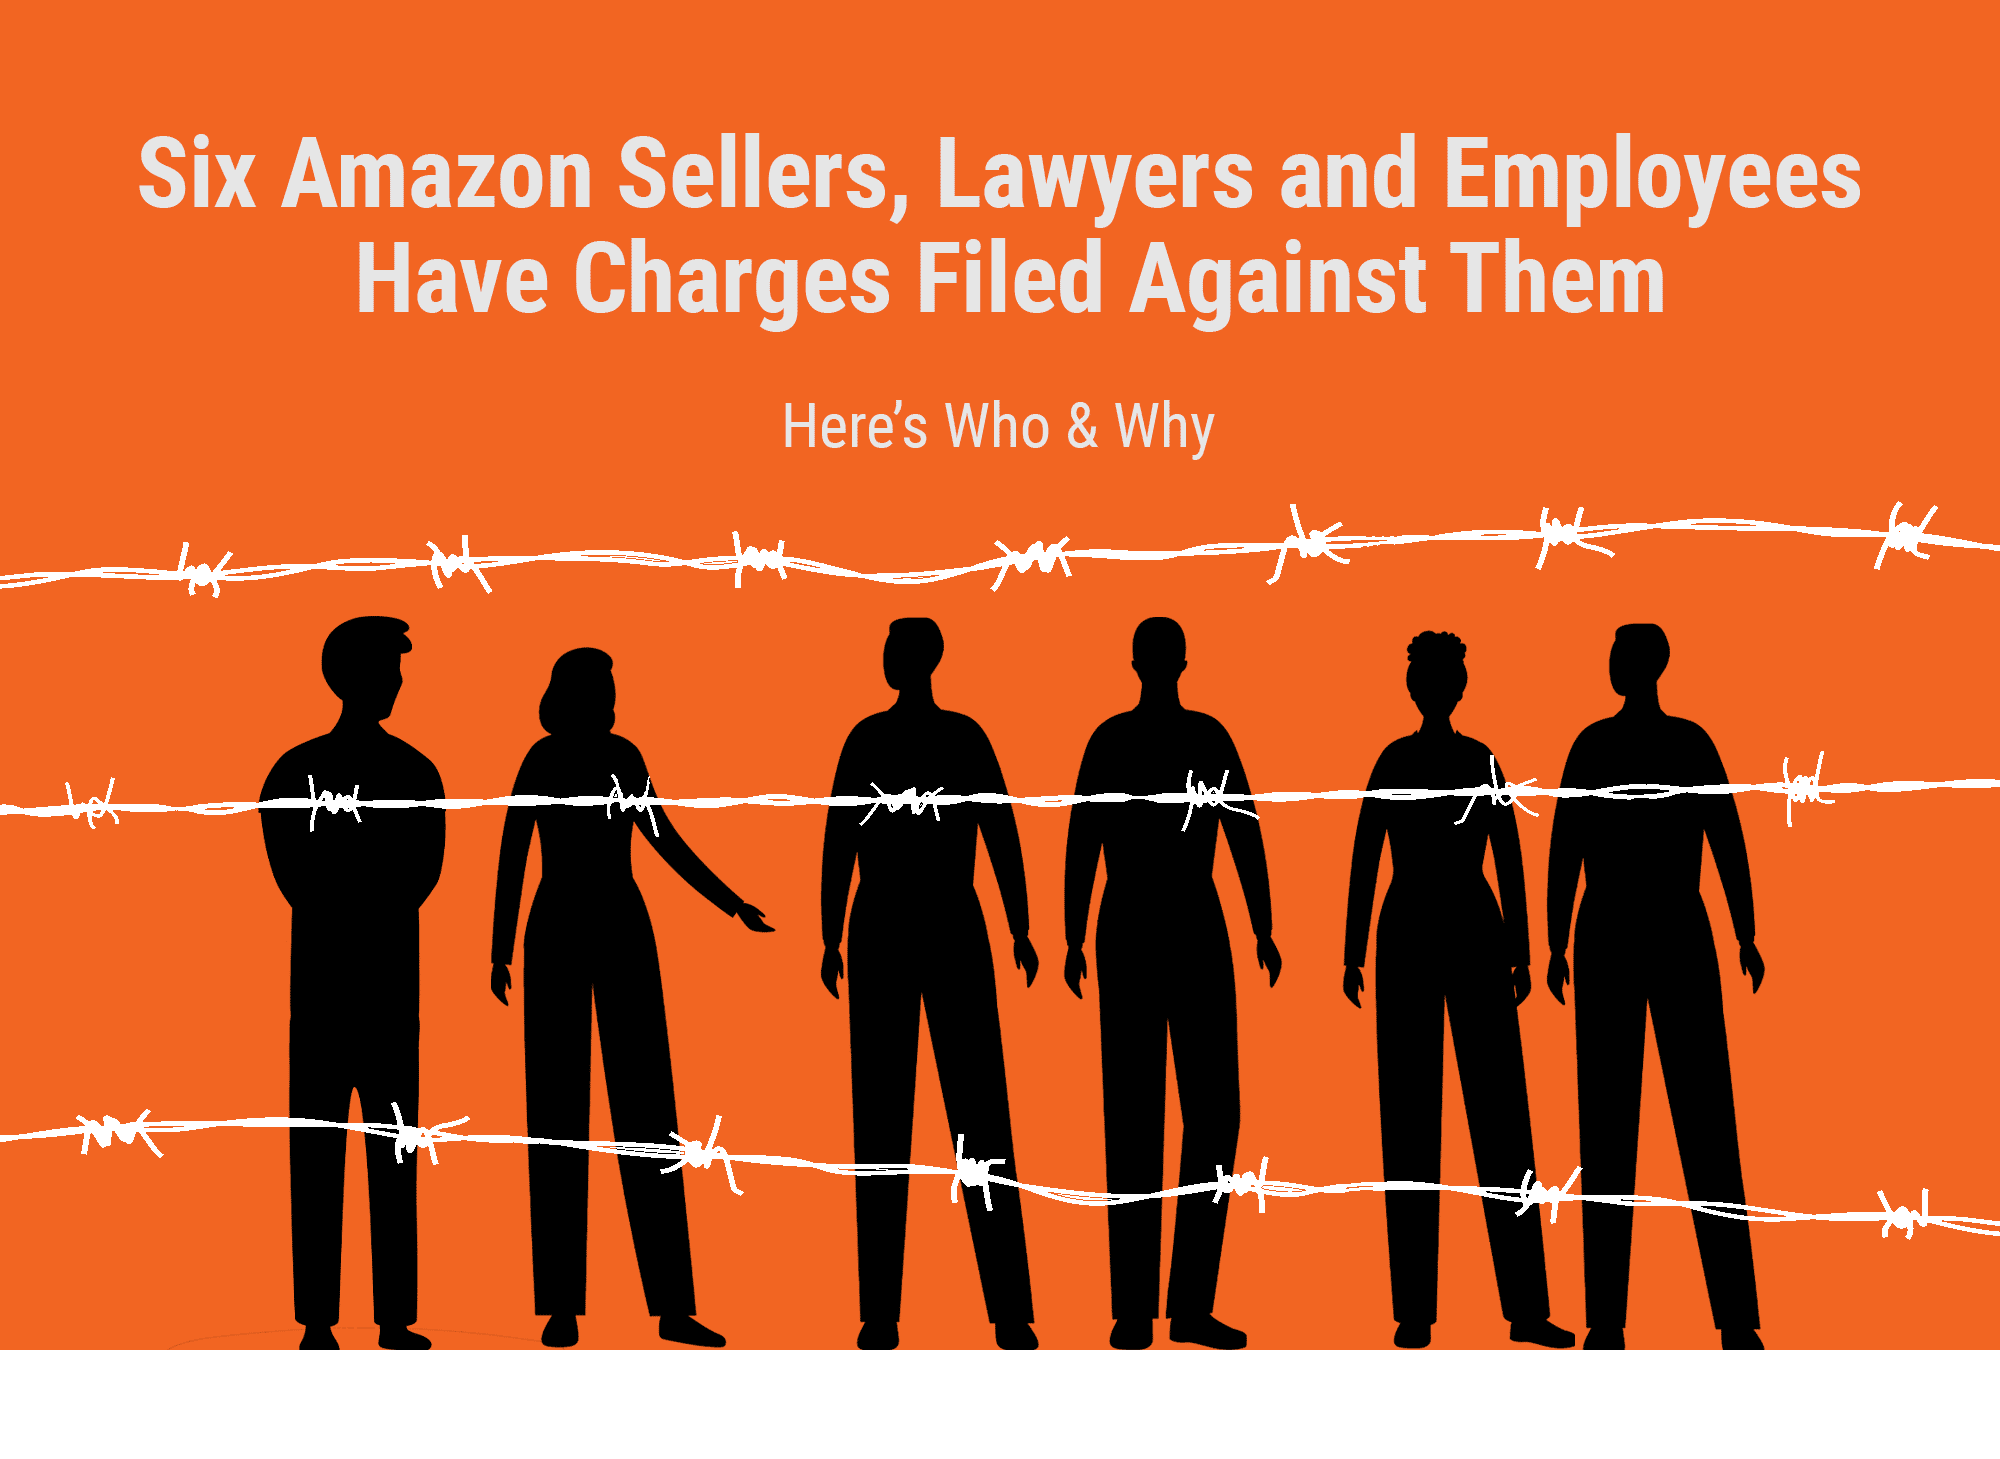 Six Amazon Sellers, Consultants, Lawyers, and Employees Have Charges Filed Against Them - Here's Who & Why